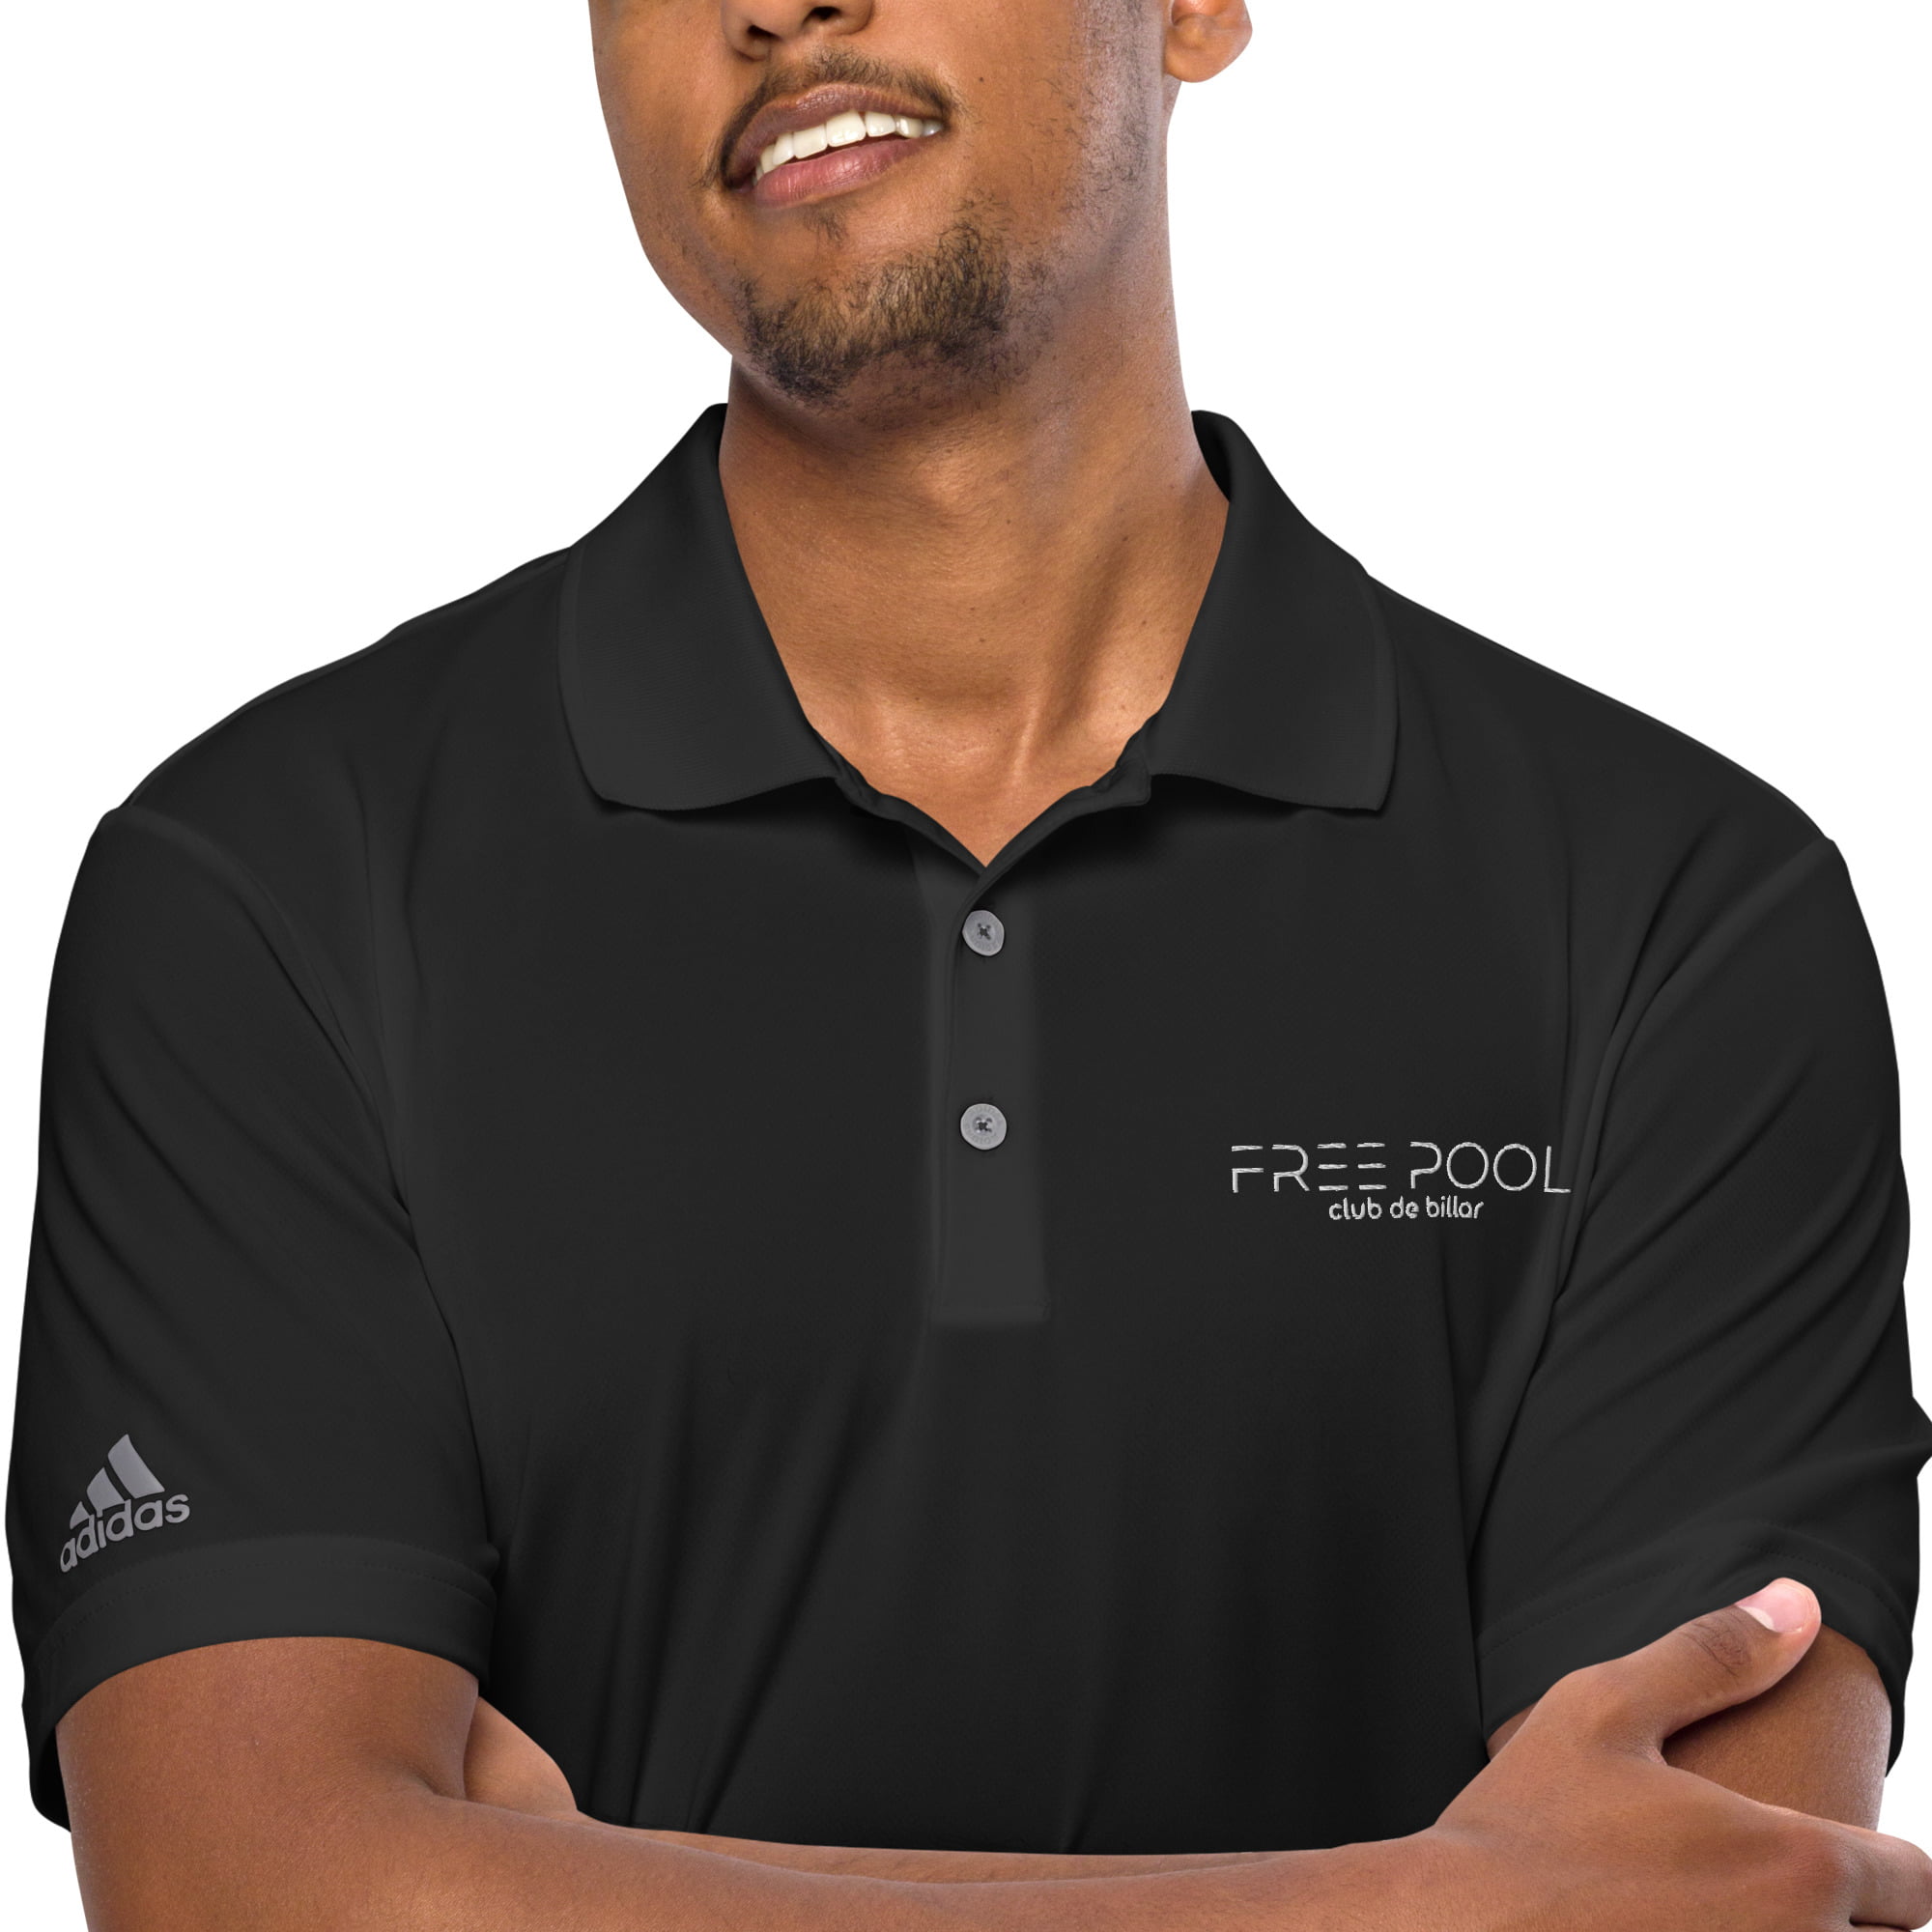 adidas-performance-polo-shirt-black-zoomed-in-64864c881d0c1.jpg